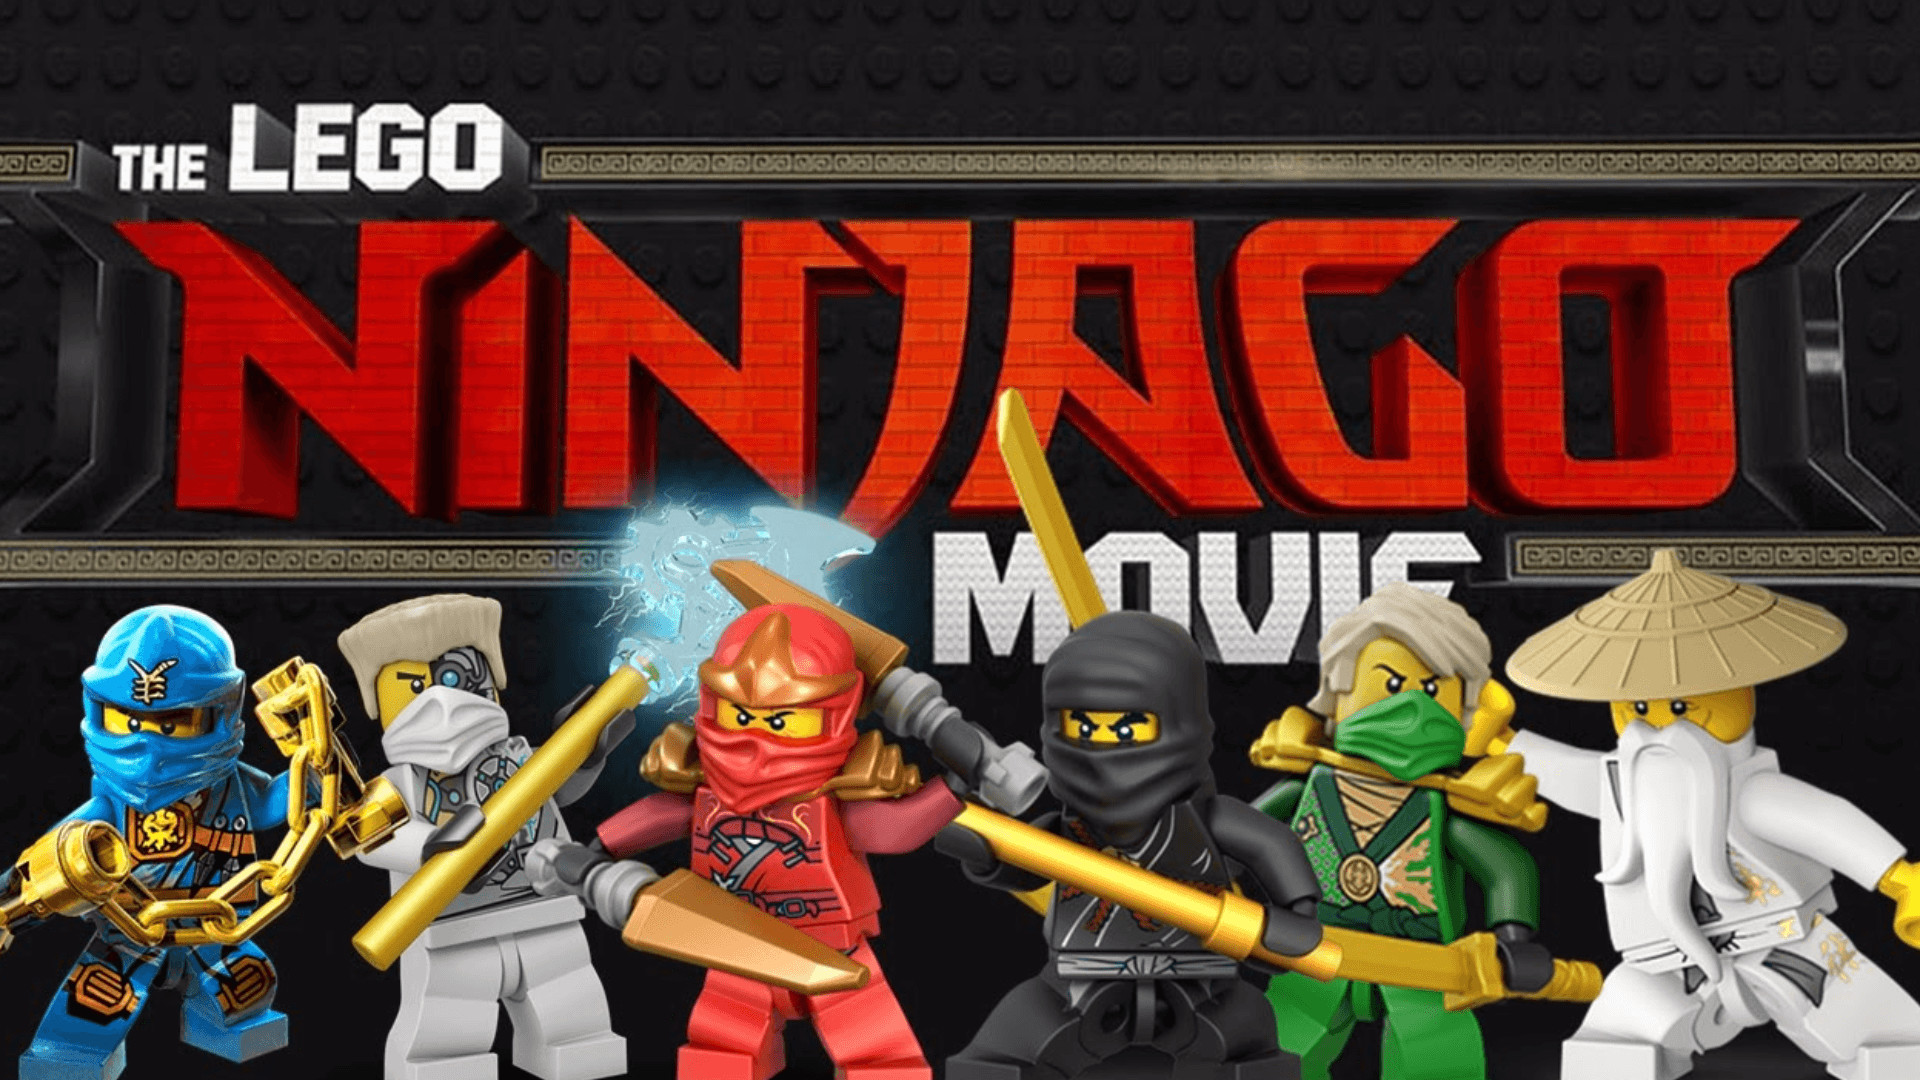 1920x1080 2764x1865 The Lego Ninjago Movie, HD Movies, 4k Wallpapers, Images ...">